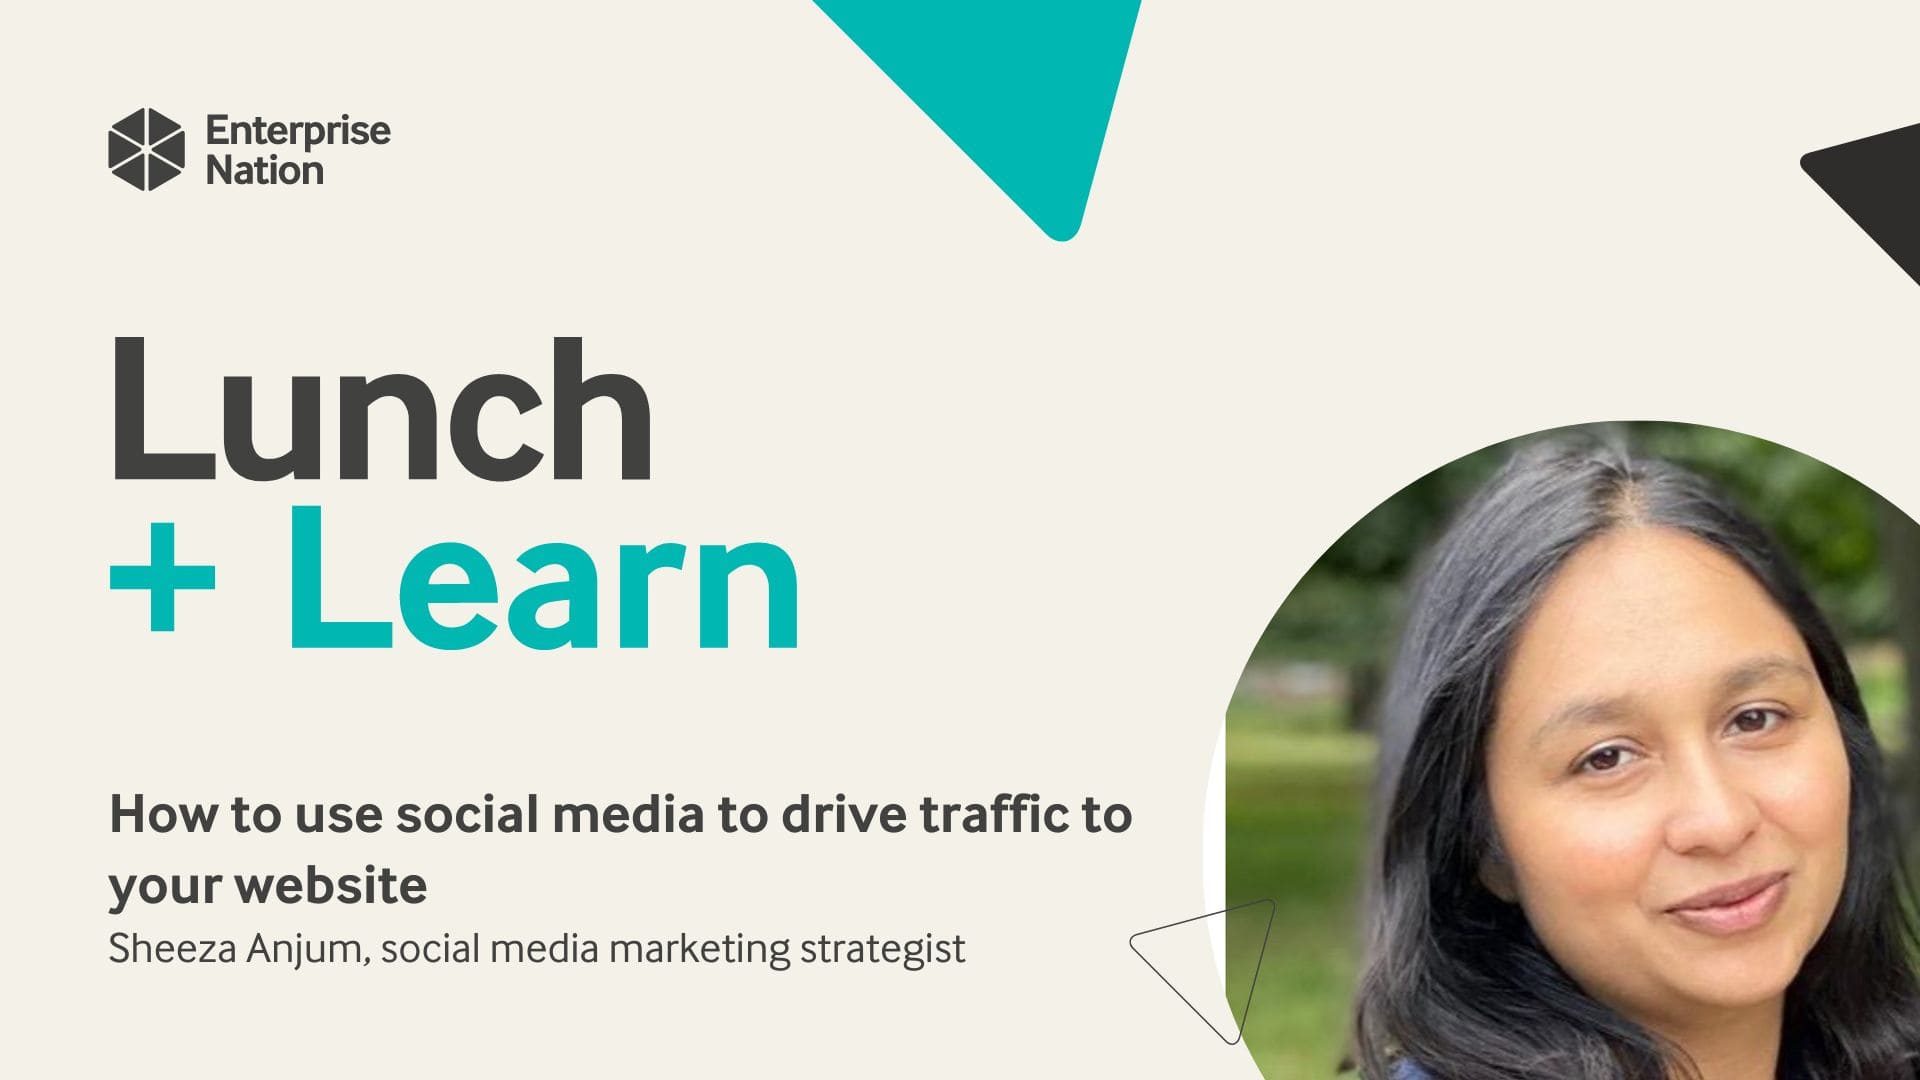 Lunch and Learn: How to use social media to drive traffic to your website